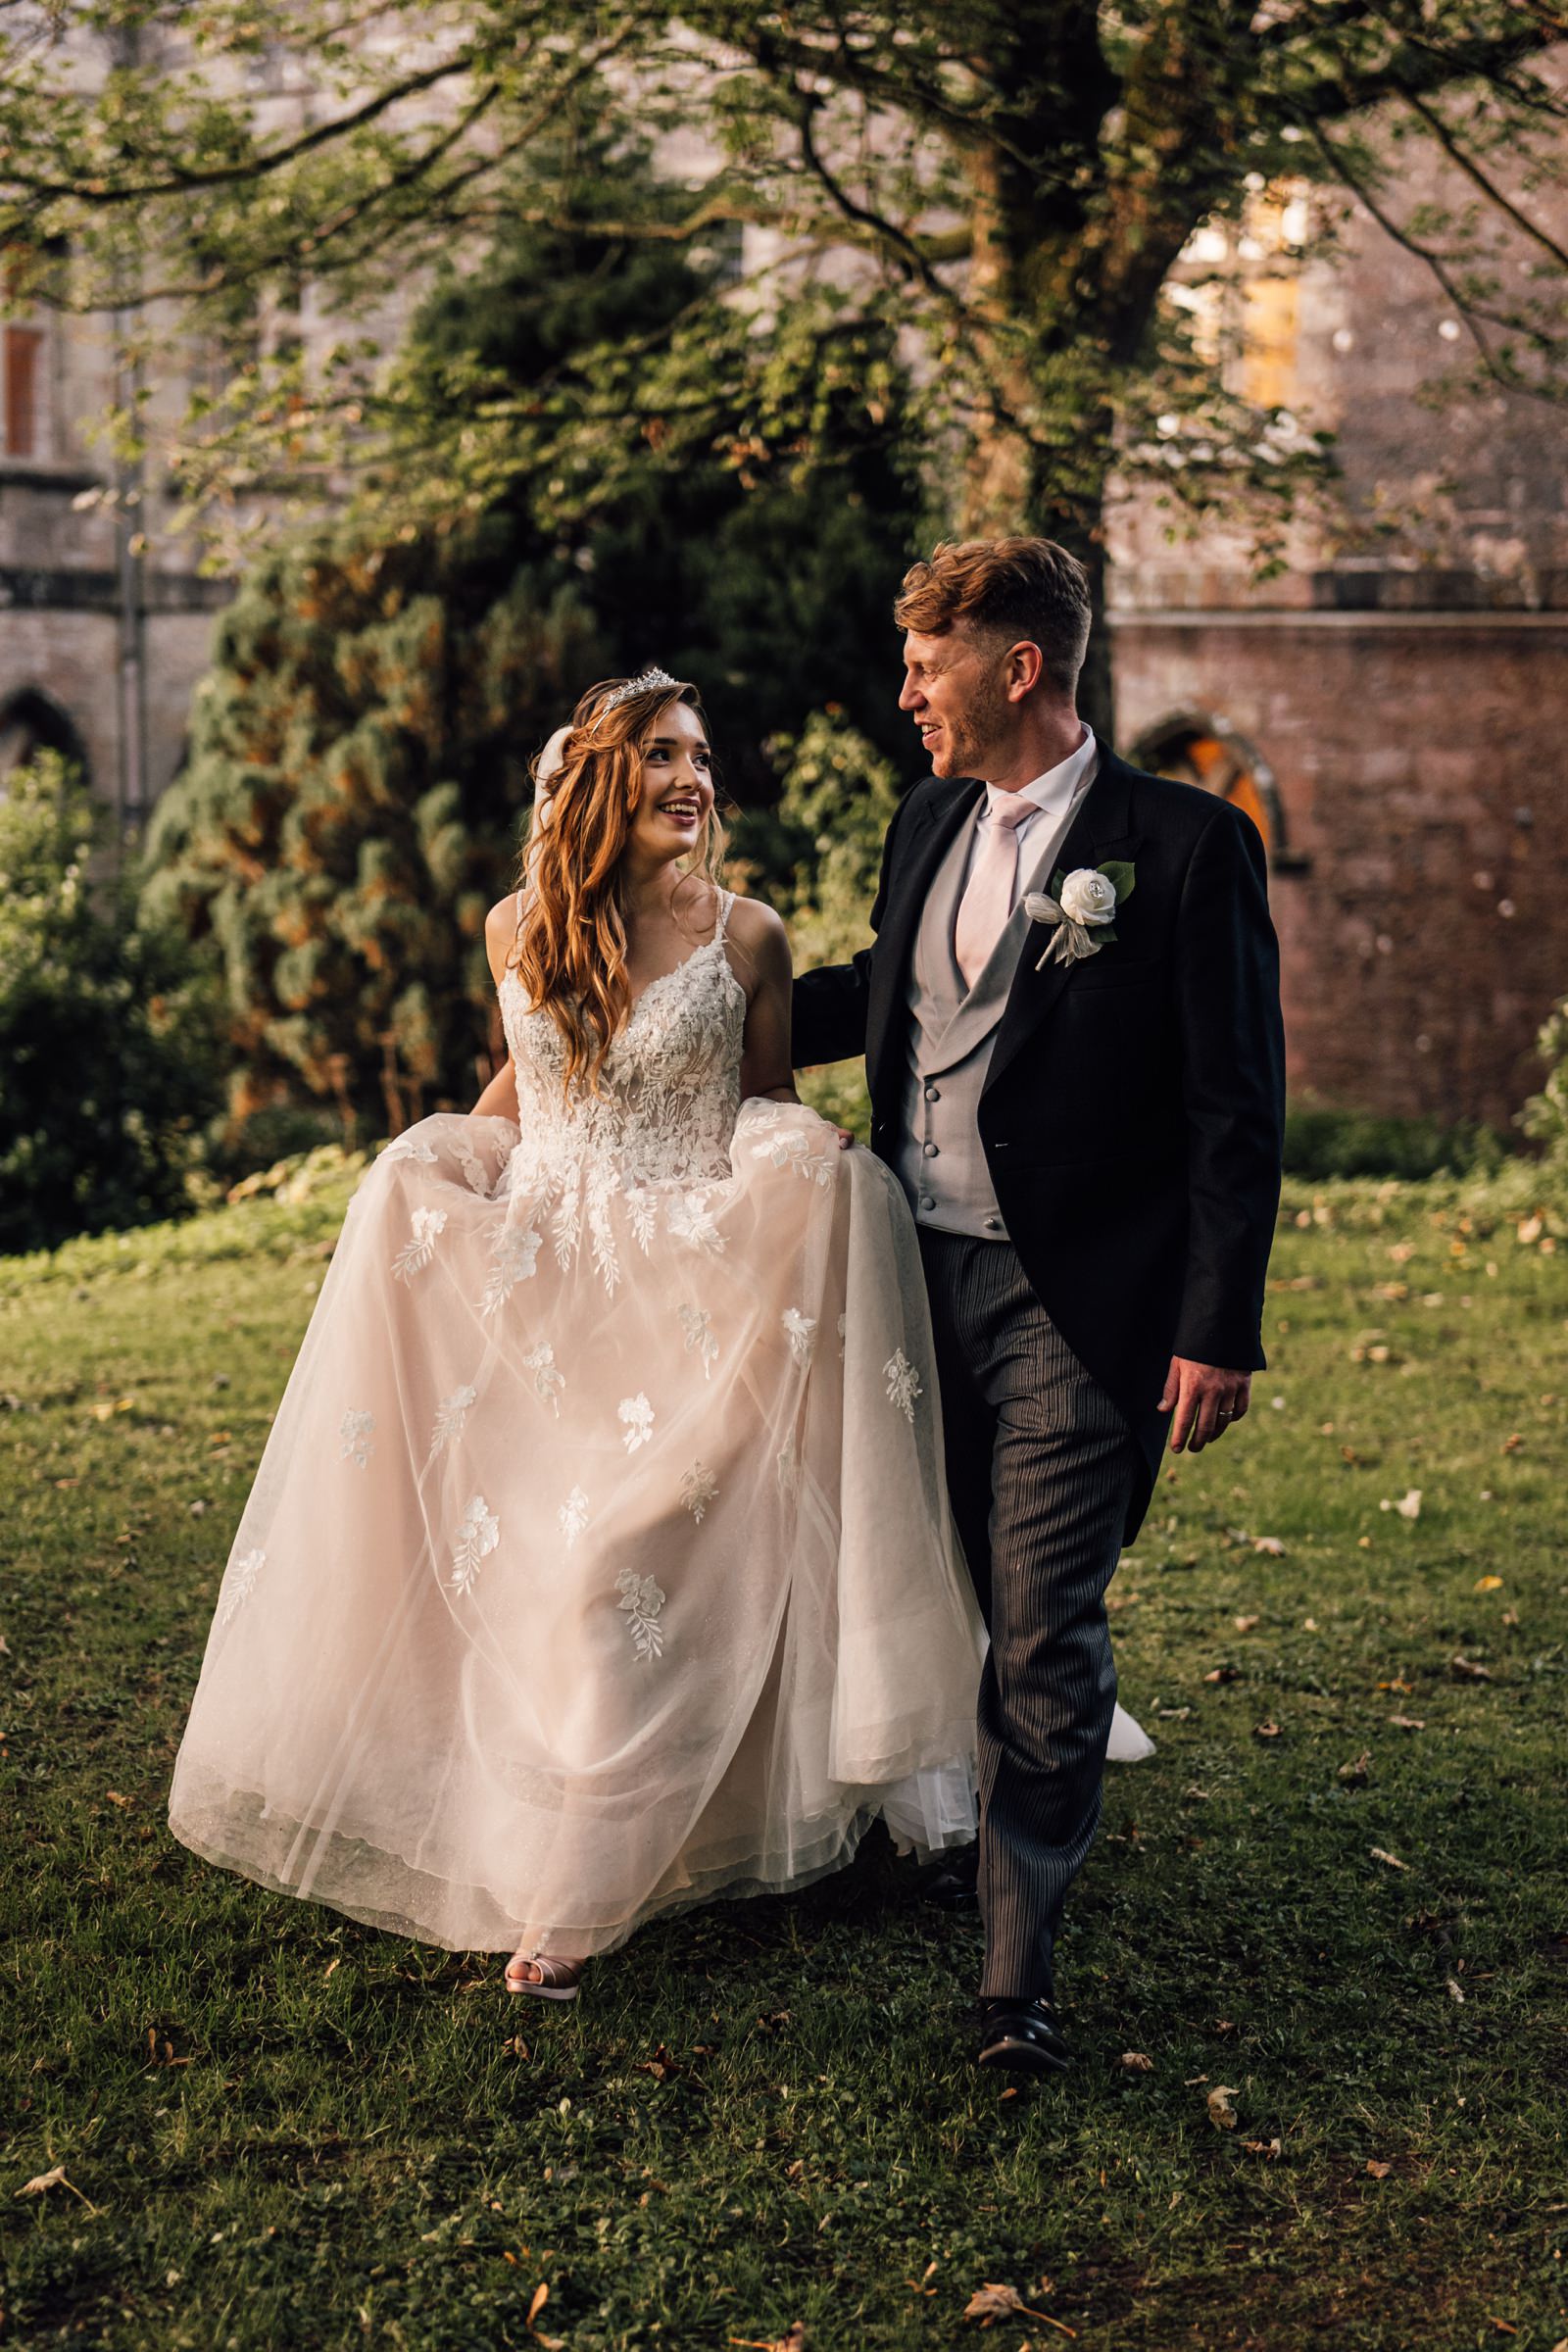 Clearwell Castle wedding day portraits